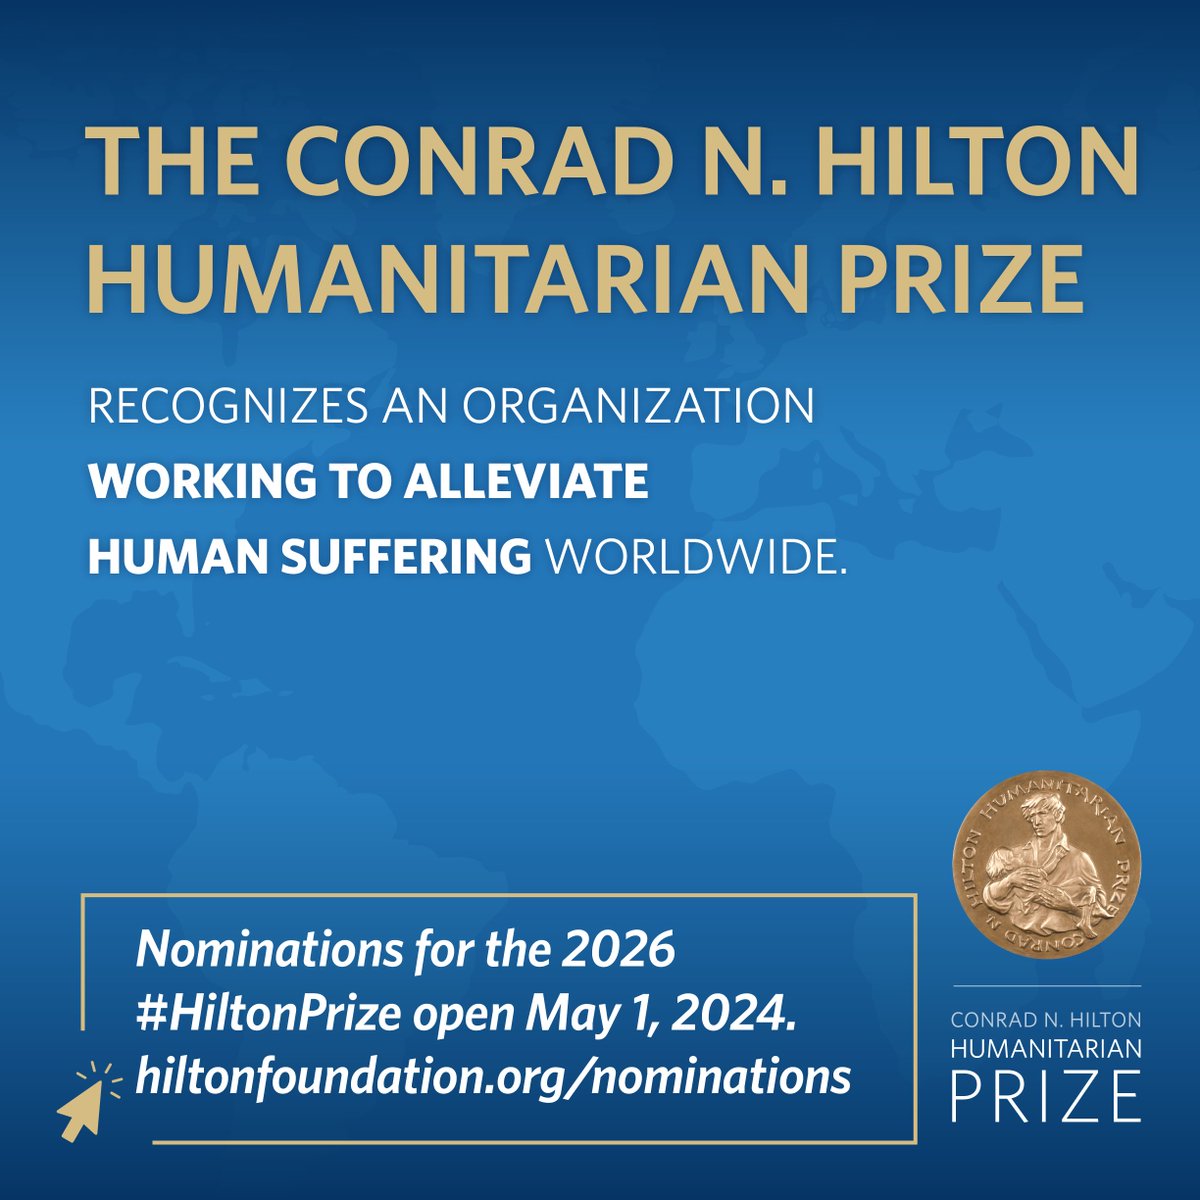 Nominate a nonprofit for the 2025 #HiltonPrize by 11:59 p.m. PT tonight (4/30) to ensure they qualify for next year's award. With our new year-round nominations process, you can nominate an org for the 2026 #HiltonPrize starting tomorrow, May 1. Visit hiltonfoundation.org/nominations.